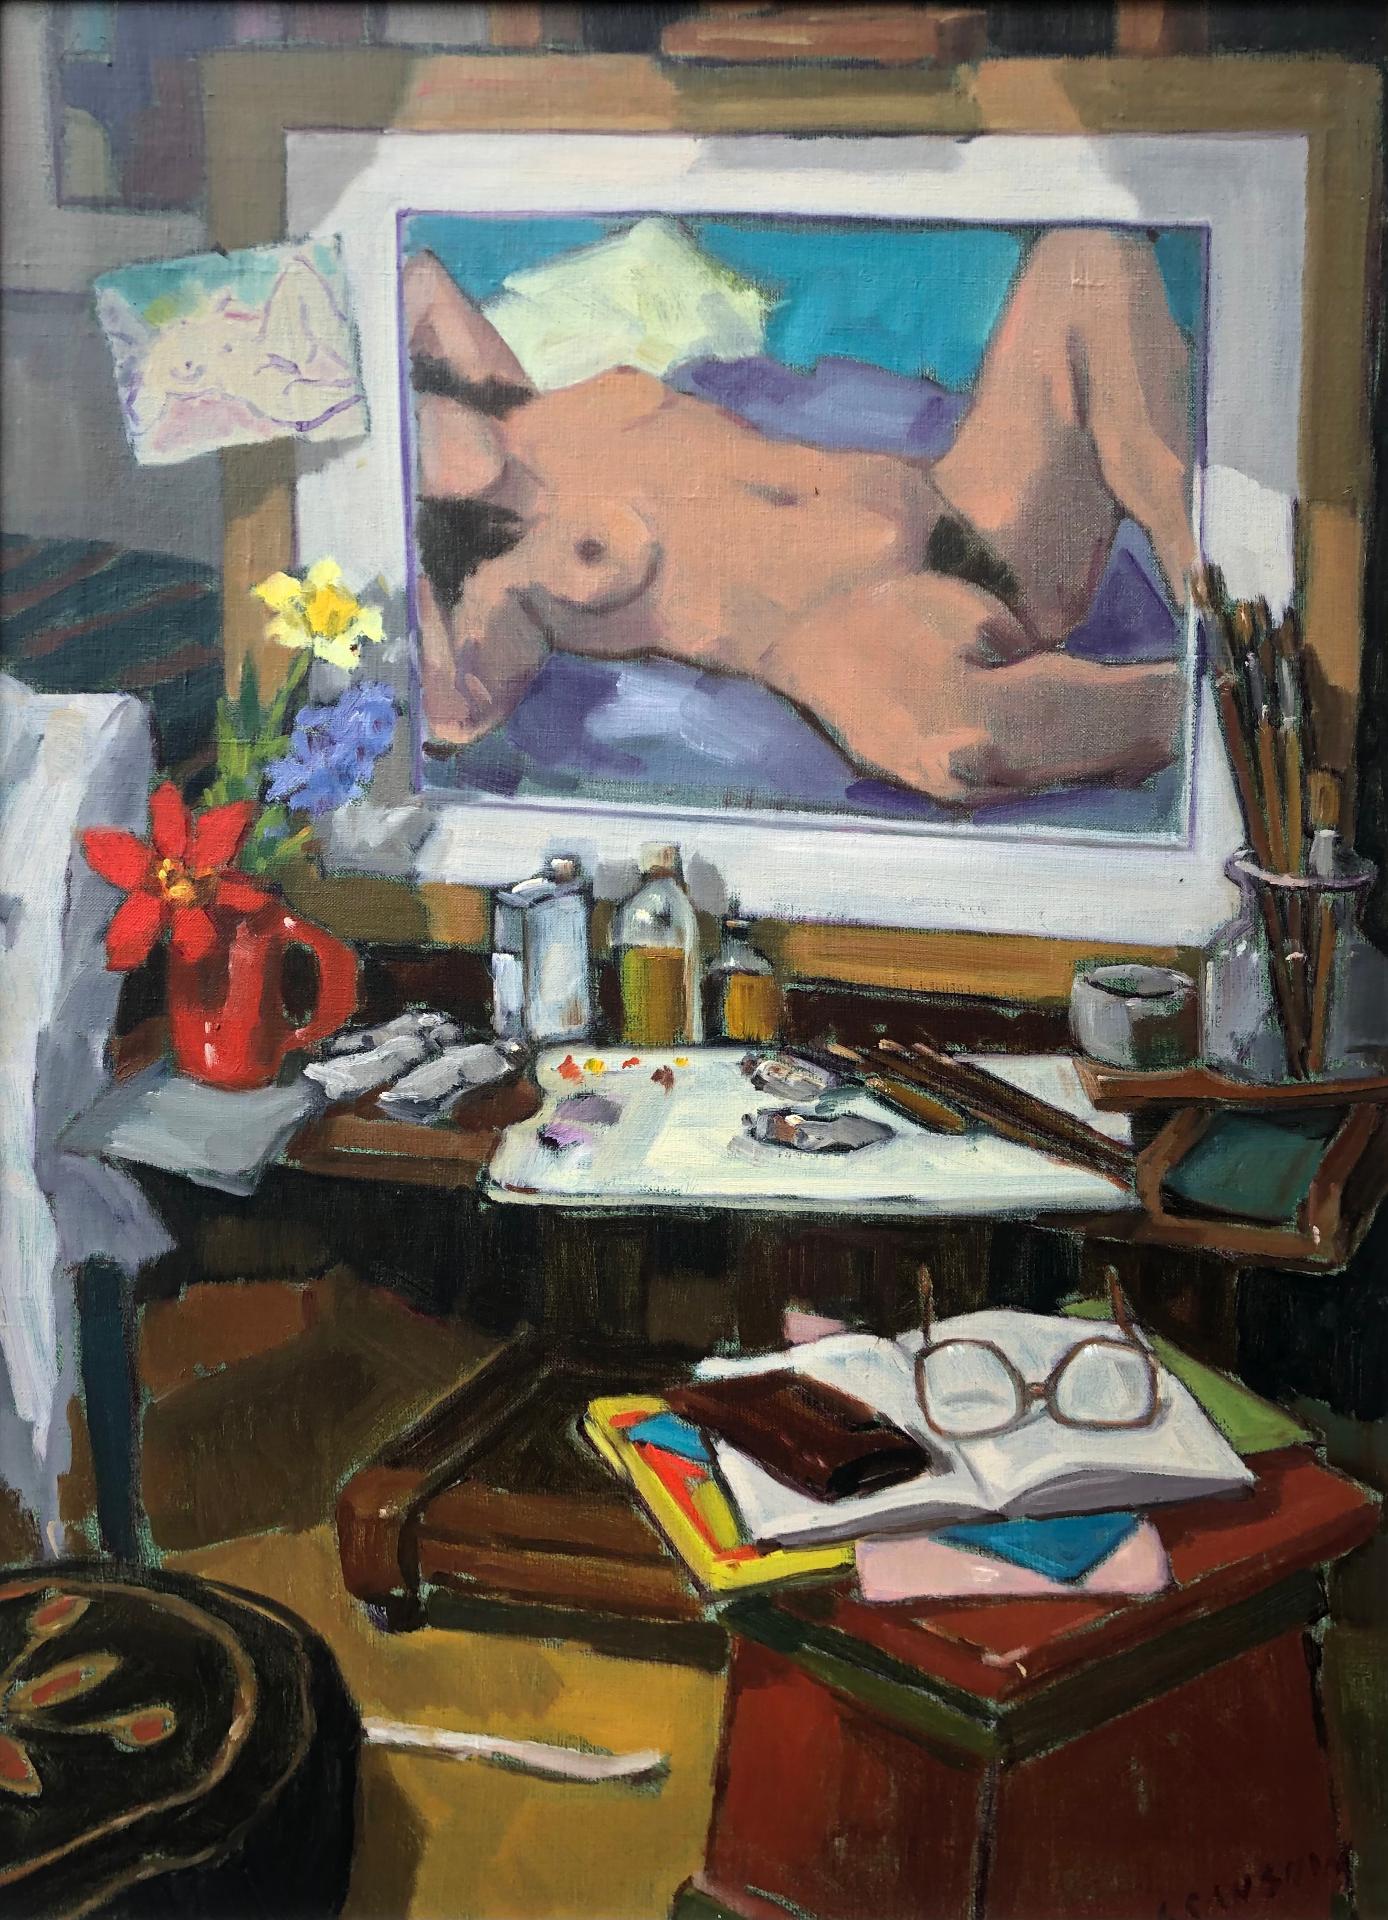 Helmut Gransow (1921-2012) - Studio Still Life with Nude Painting, 1982